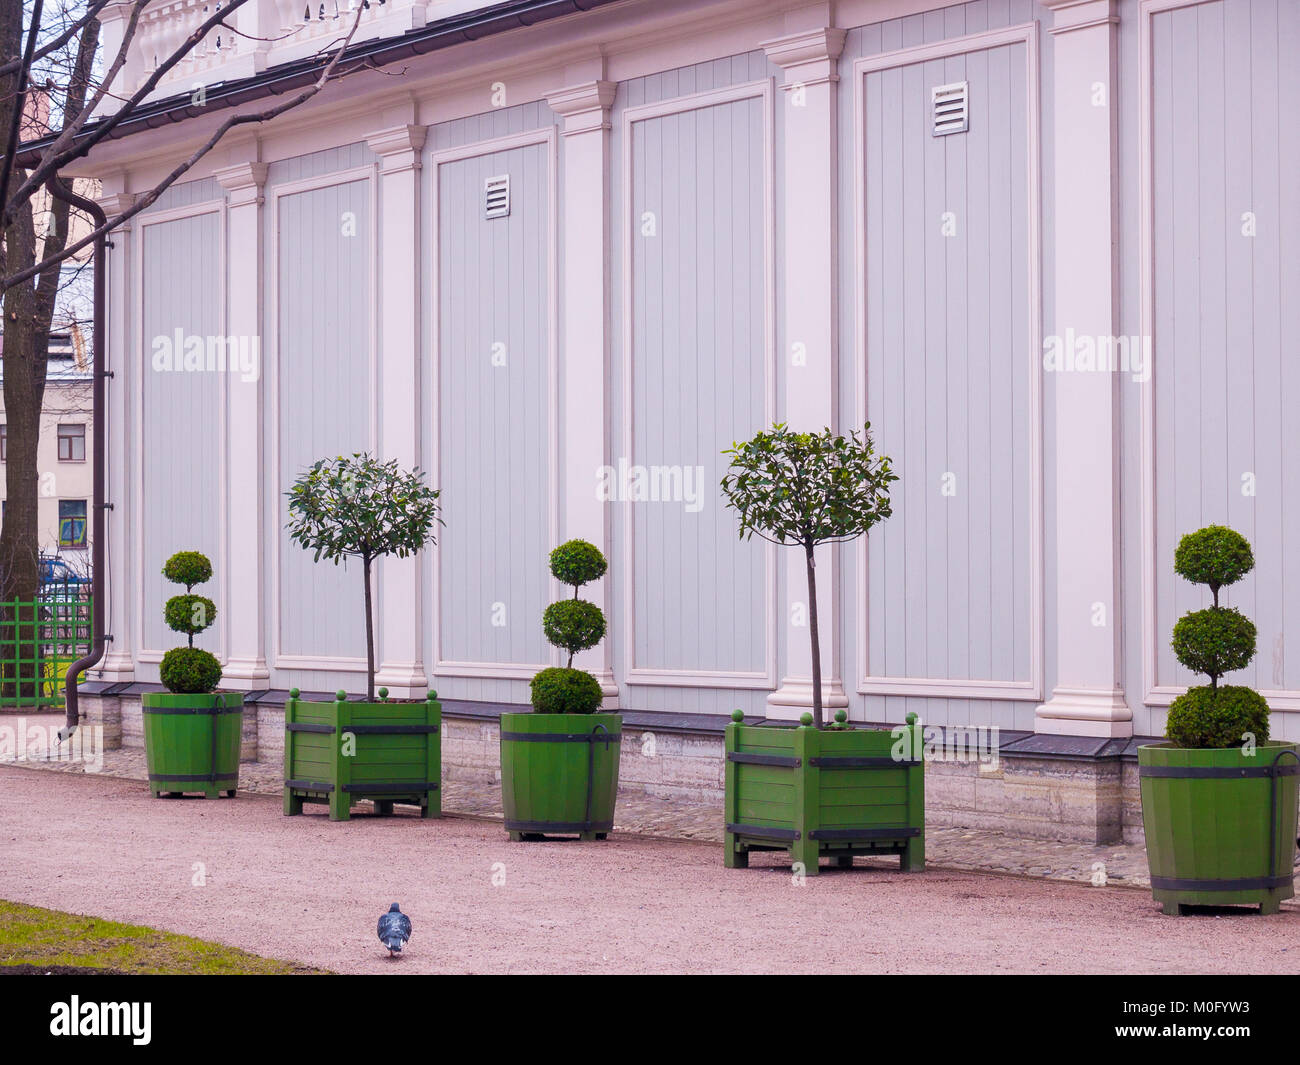 Dwarf trees in green tubs cut different shapes stand near the winter greenhouse building in early spring in April in the park Summer Garden in St. Pet Stock Photo